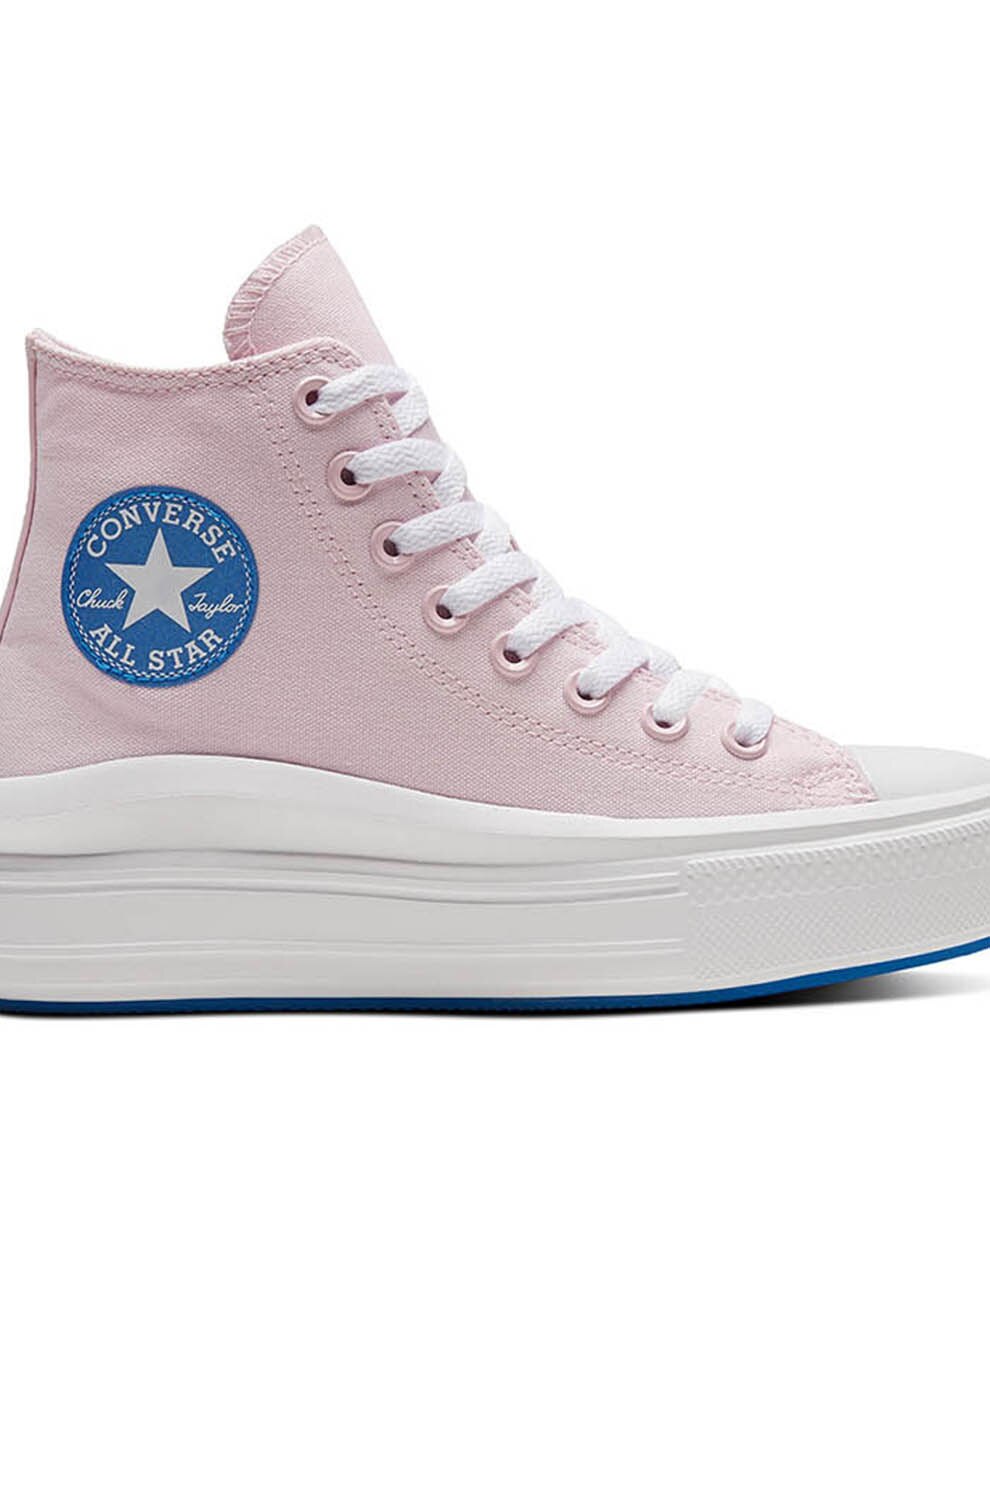 farmers Take out insurance Advertiser Converse, Tenisi flatform Chuck Taylor All Star Move - eMAG.ro